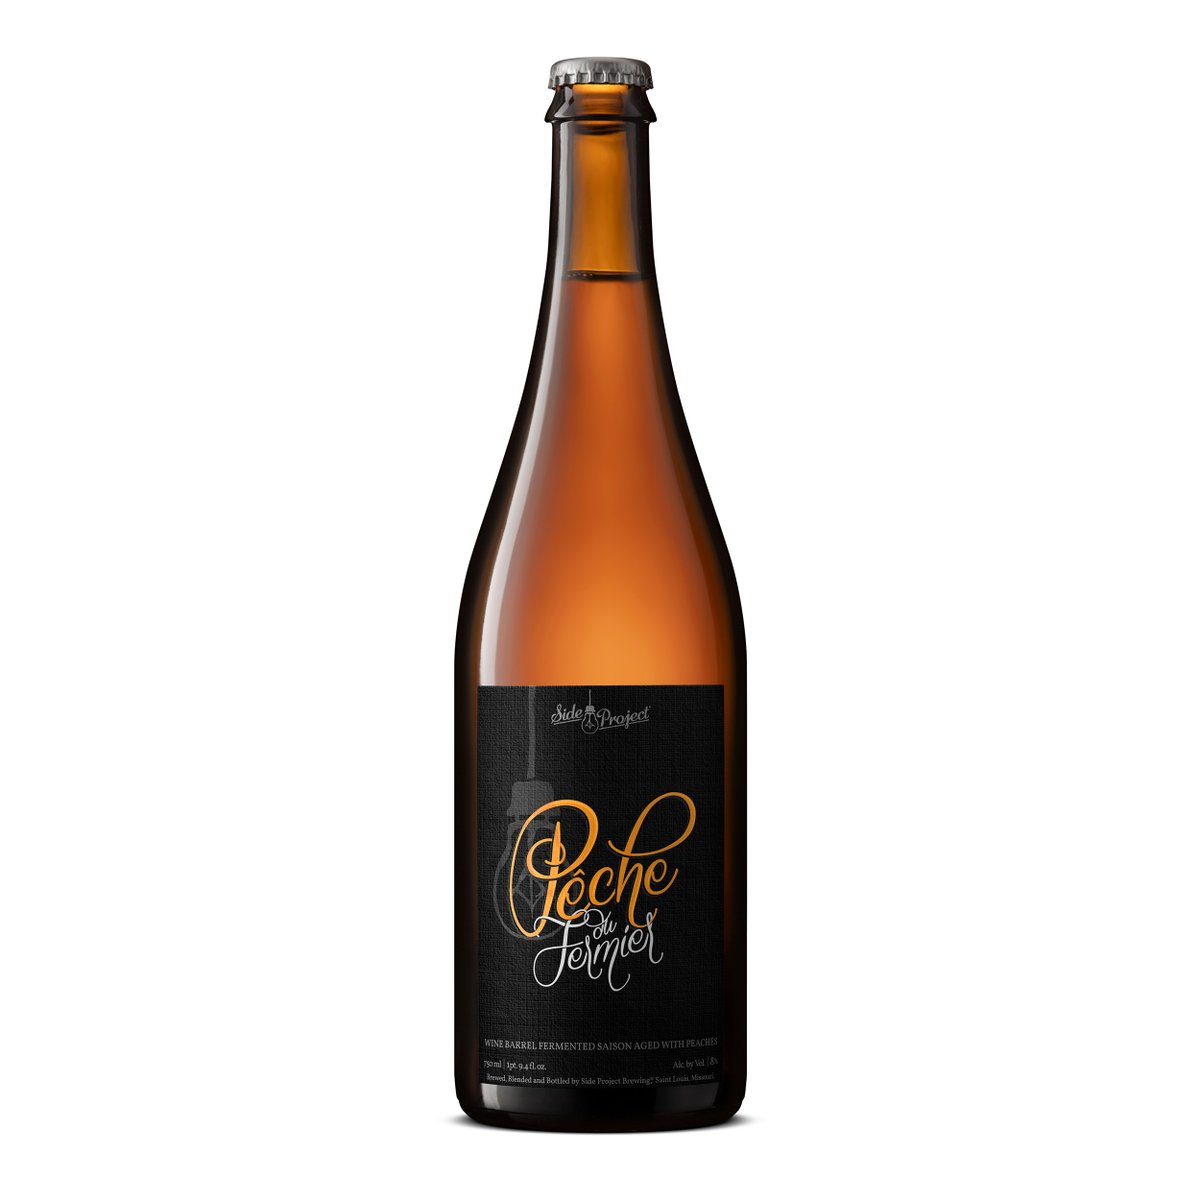 We've added some new merchandise to our Online Shop, along with two new beer releases! Zomer, a Belgian-style Witbier, and Pêche du Fermier - 10 Year!